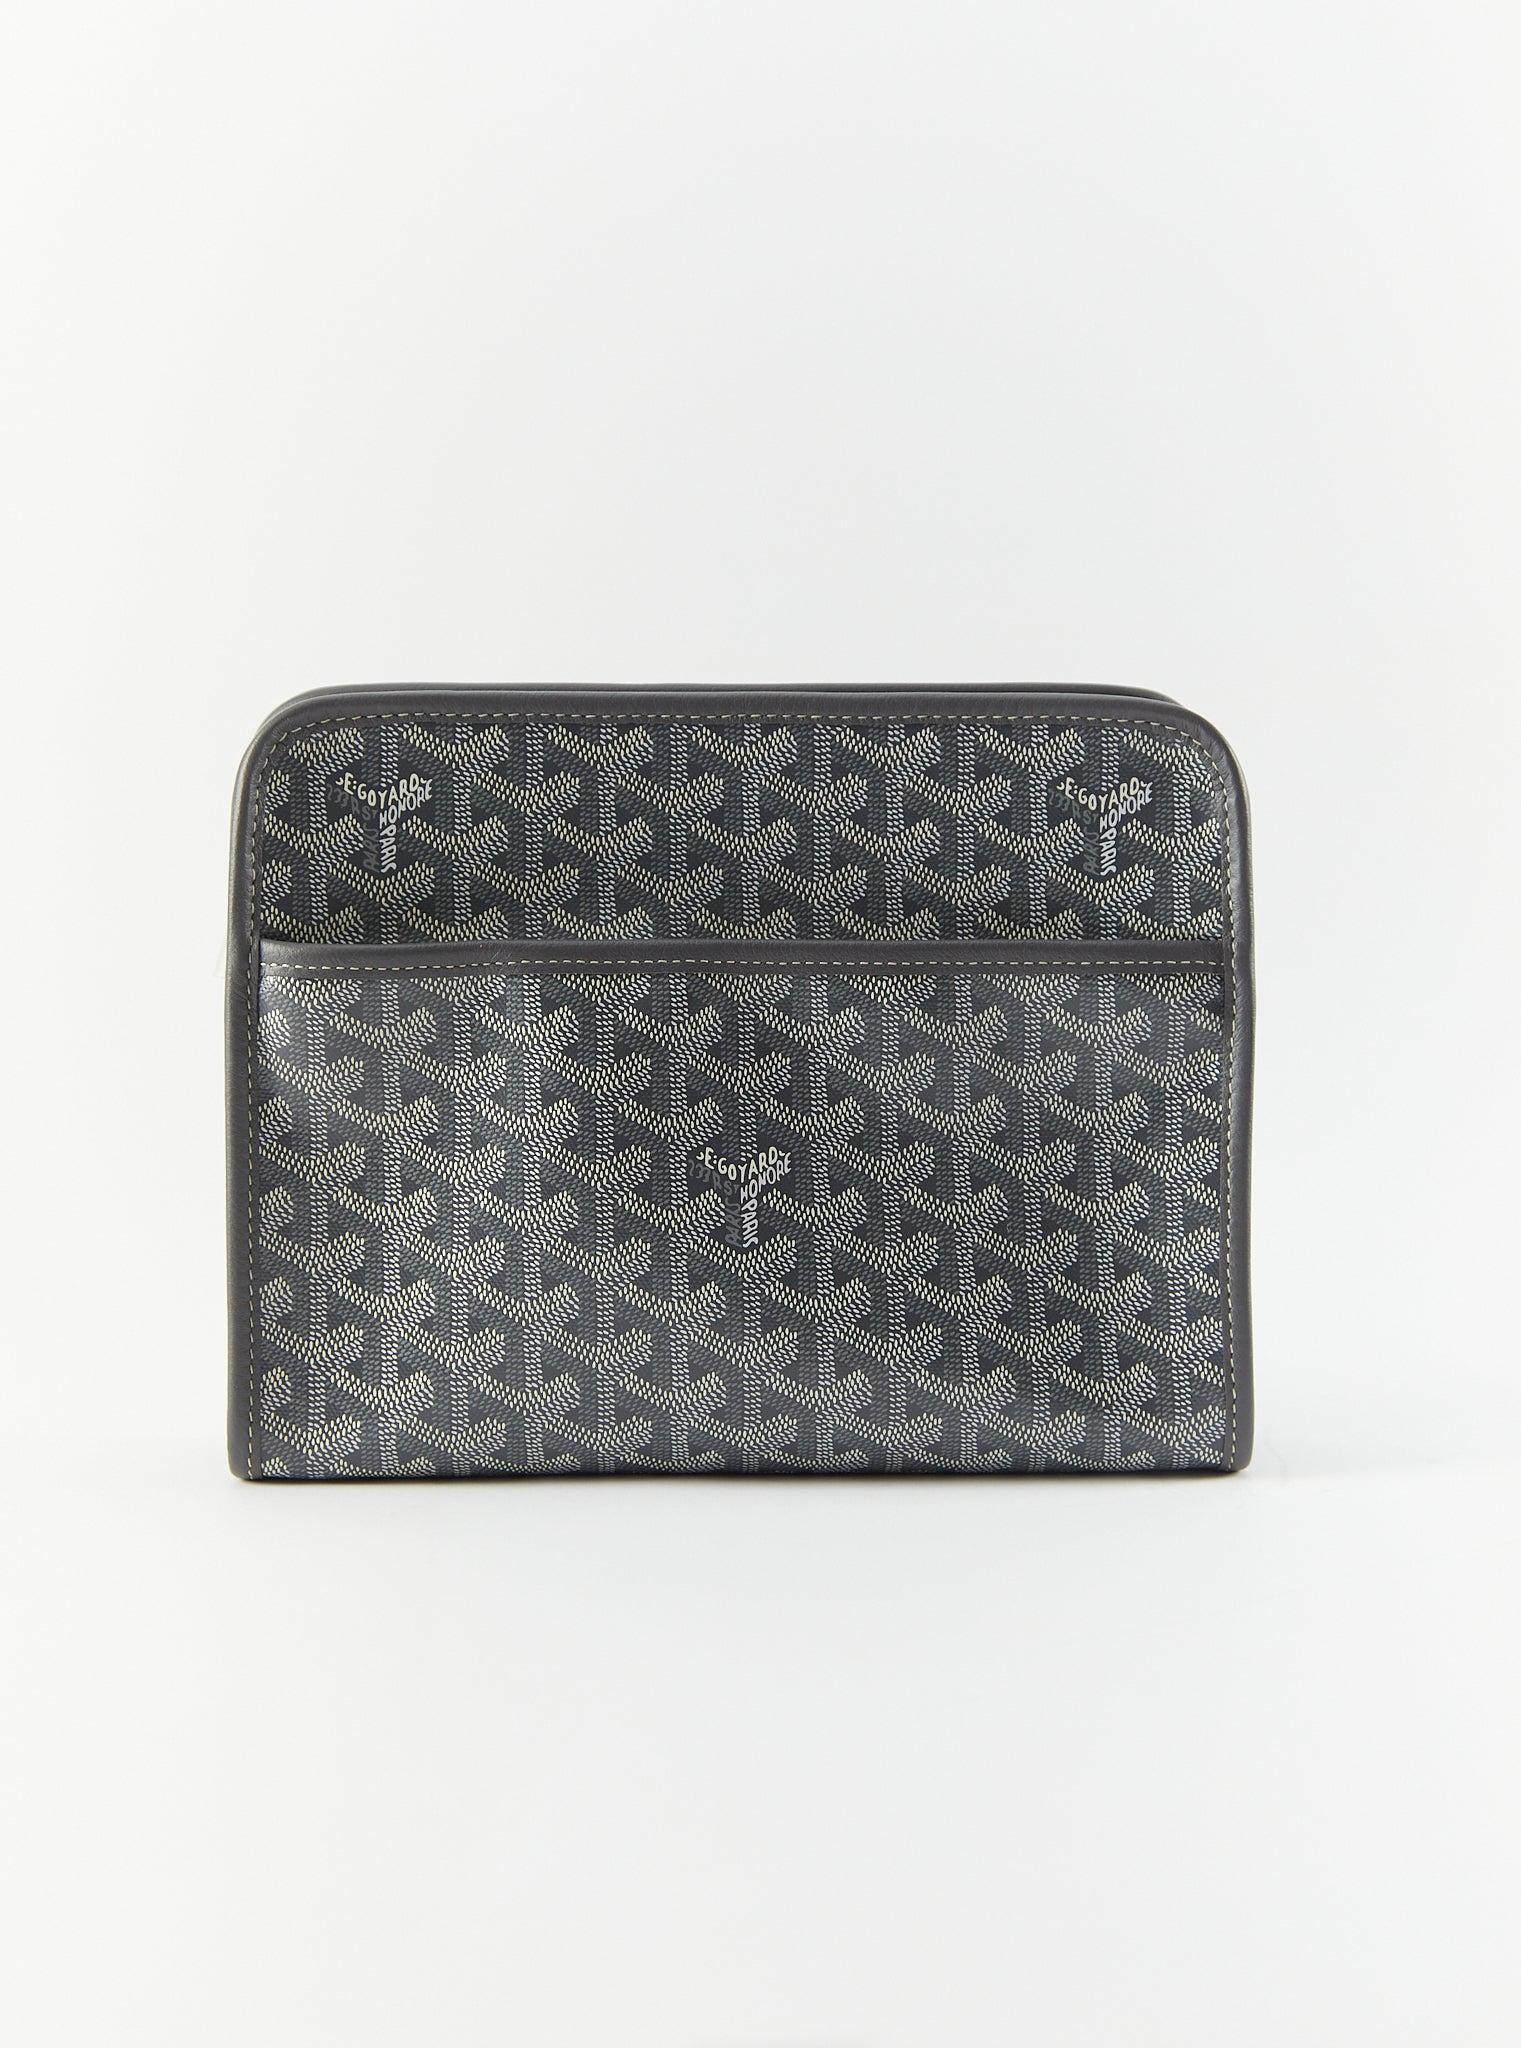 GOYARD Jouvence MM Toiletry Bag in Grey In Excellent Condition For Sale In London, GB